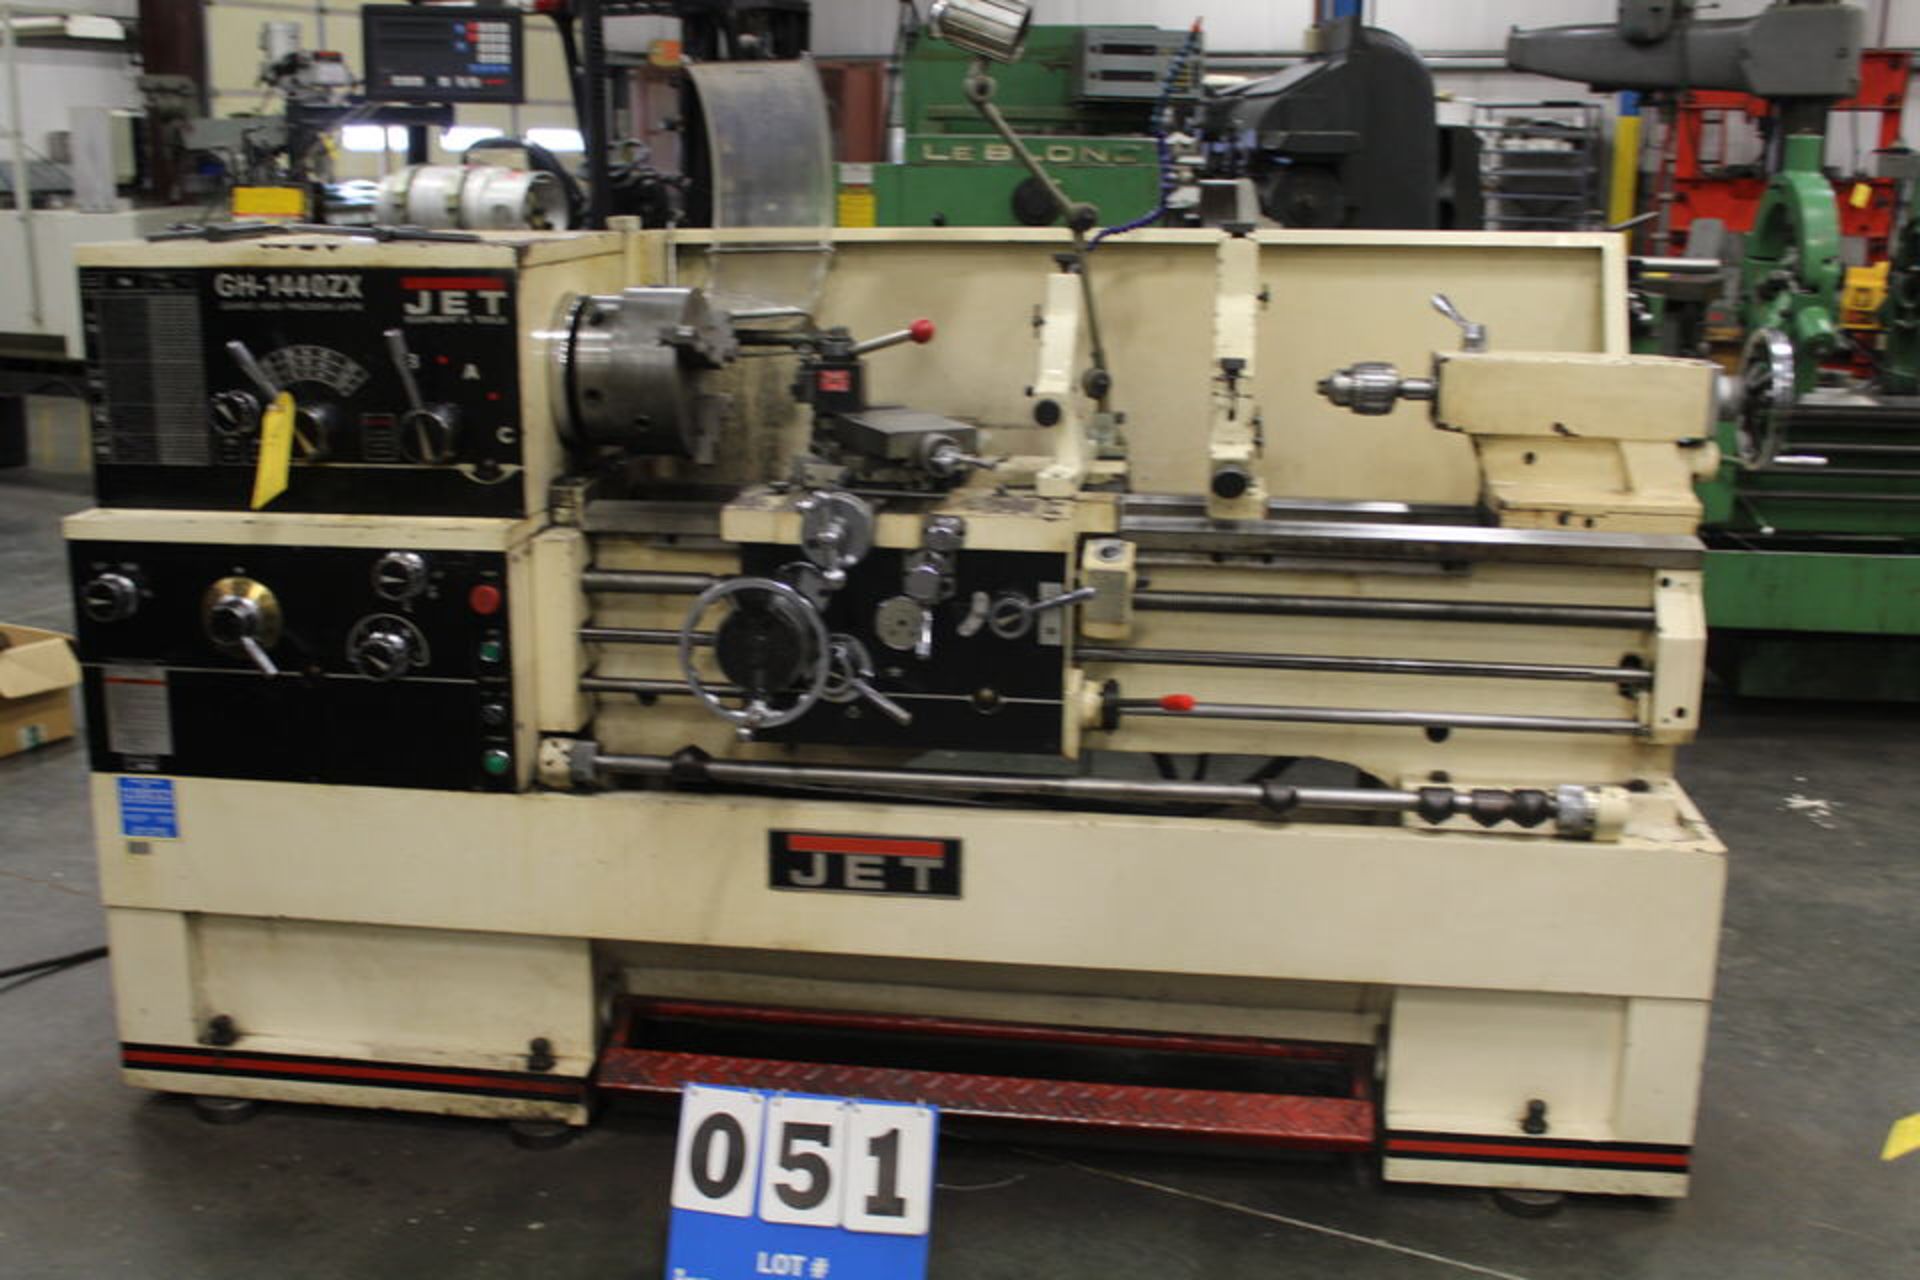 JET GH-1440ZX ENGINE LATHE W/ NEWALL DRO, 5' BED, 10" 3 JAW CHUCK, TOOL HOLDER, STEADY REST